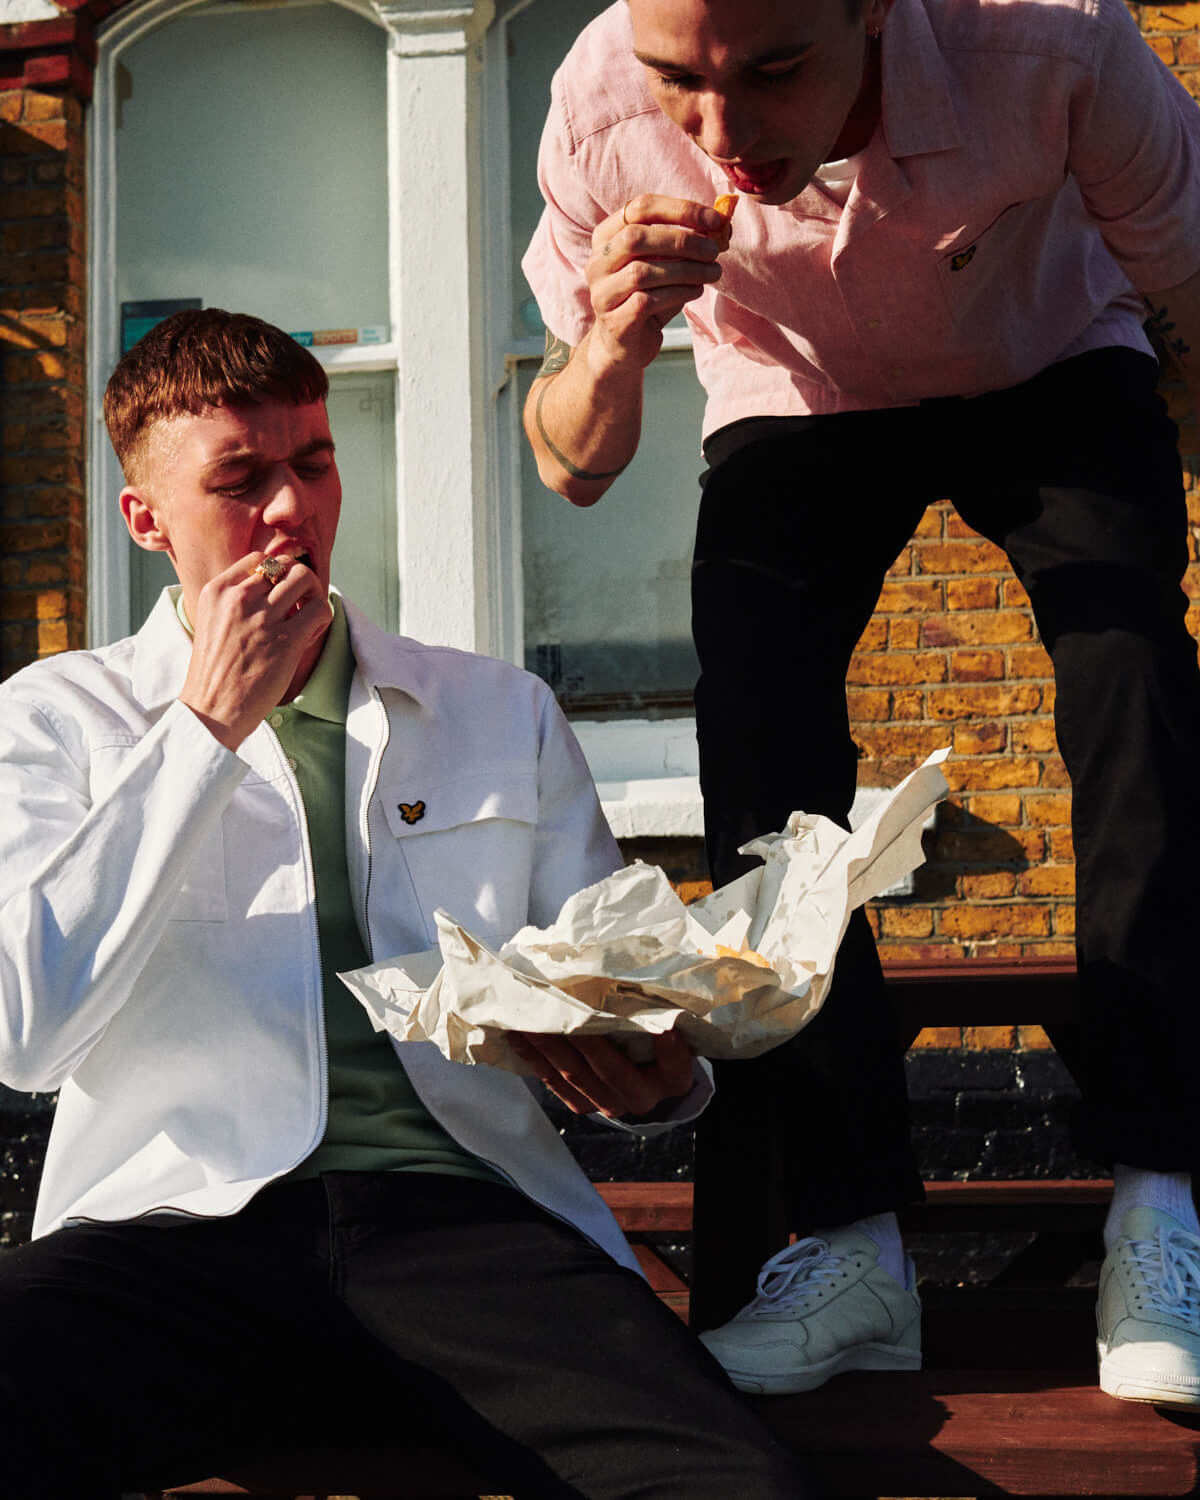 Two lads eat chips, by lifestyle photographer 